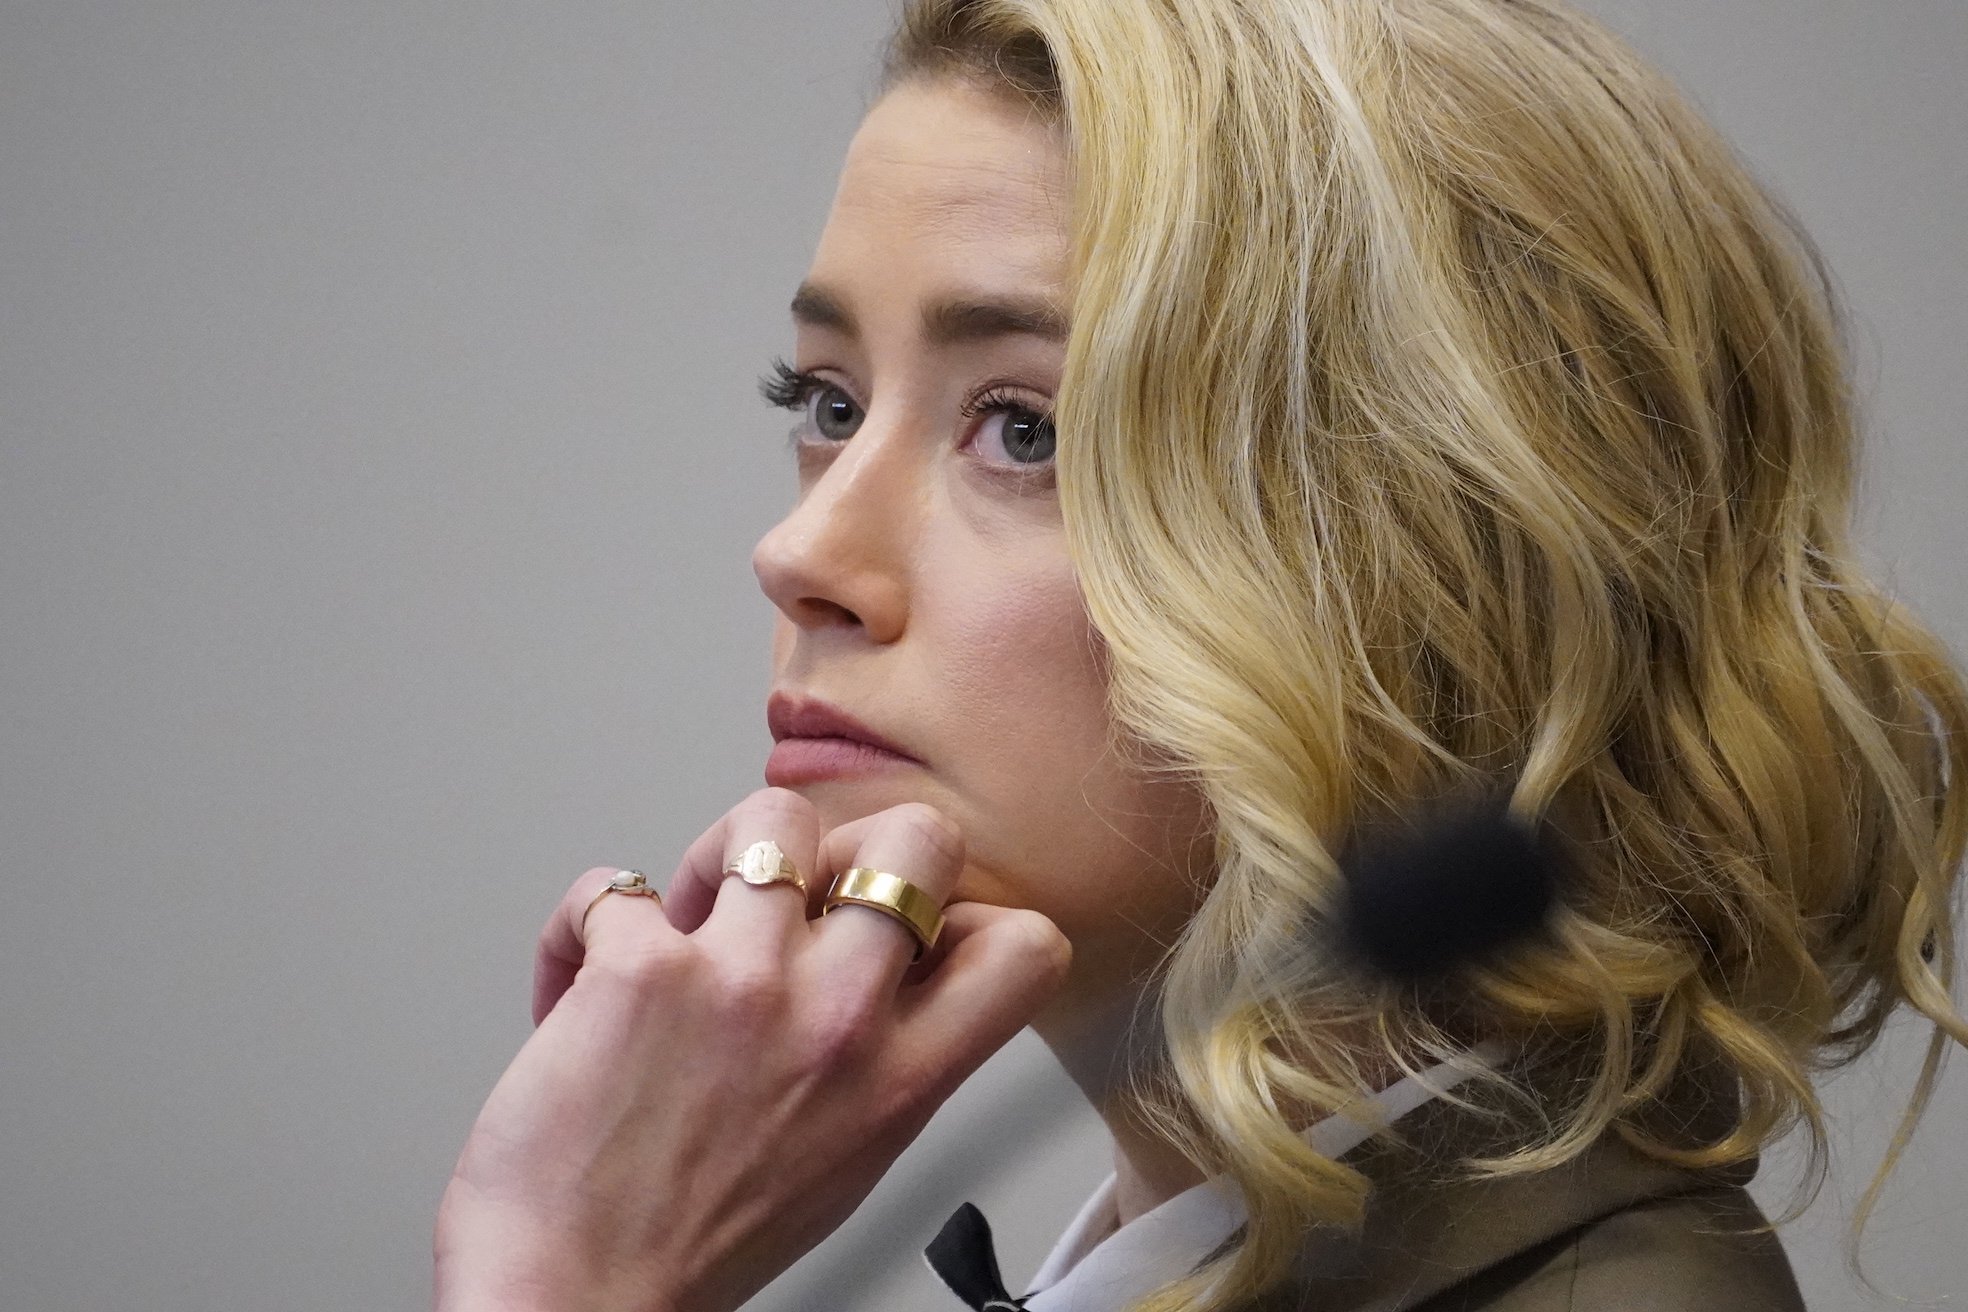 A close-up of Amber Heard during the Johnny Depp and Amber Heard trial